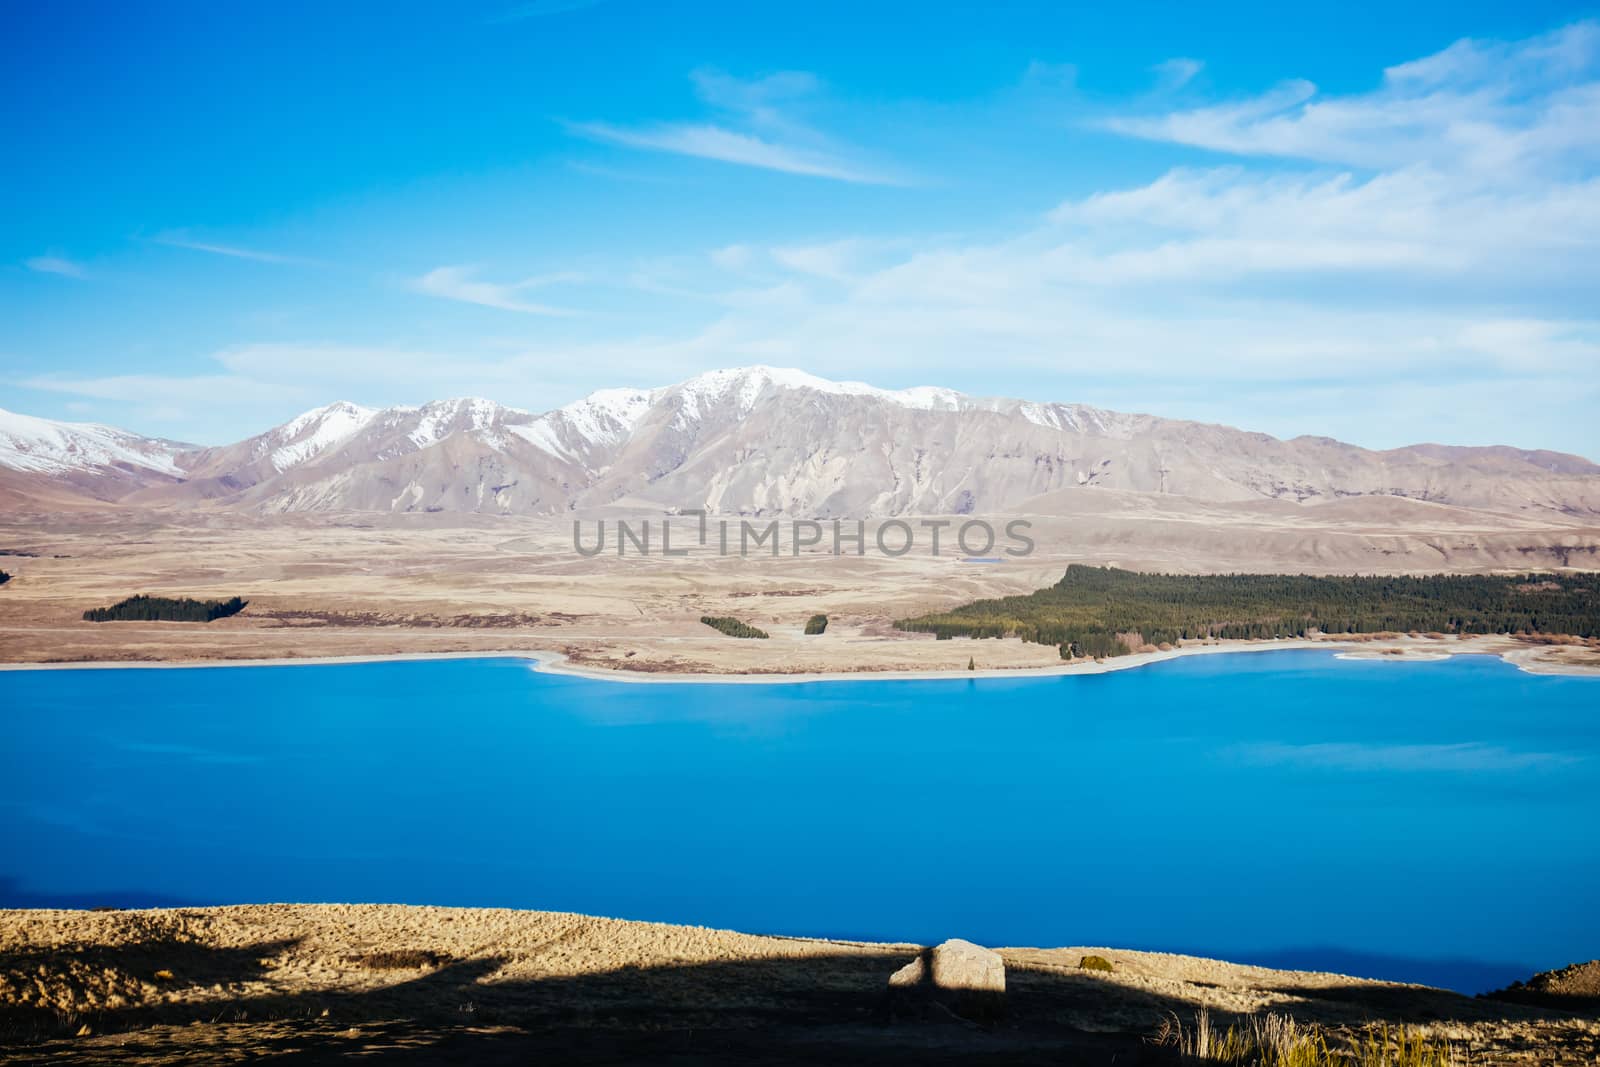 The view of the southern alps and Lake Alexandrina from Mt John Walkway and observatory area near Lake Tekapo on a clear spring evening in New Zealand